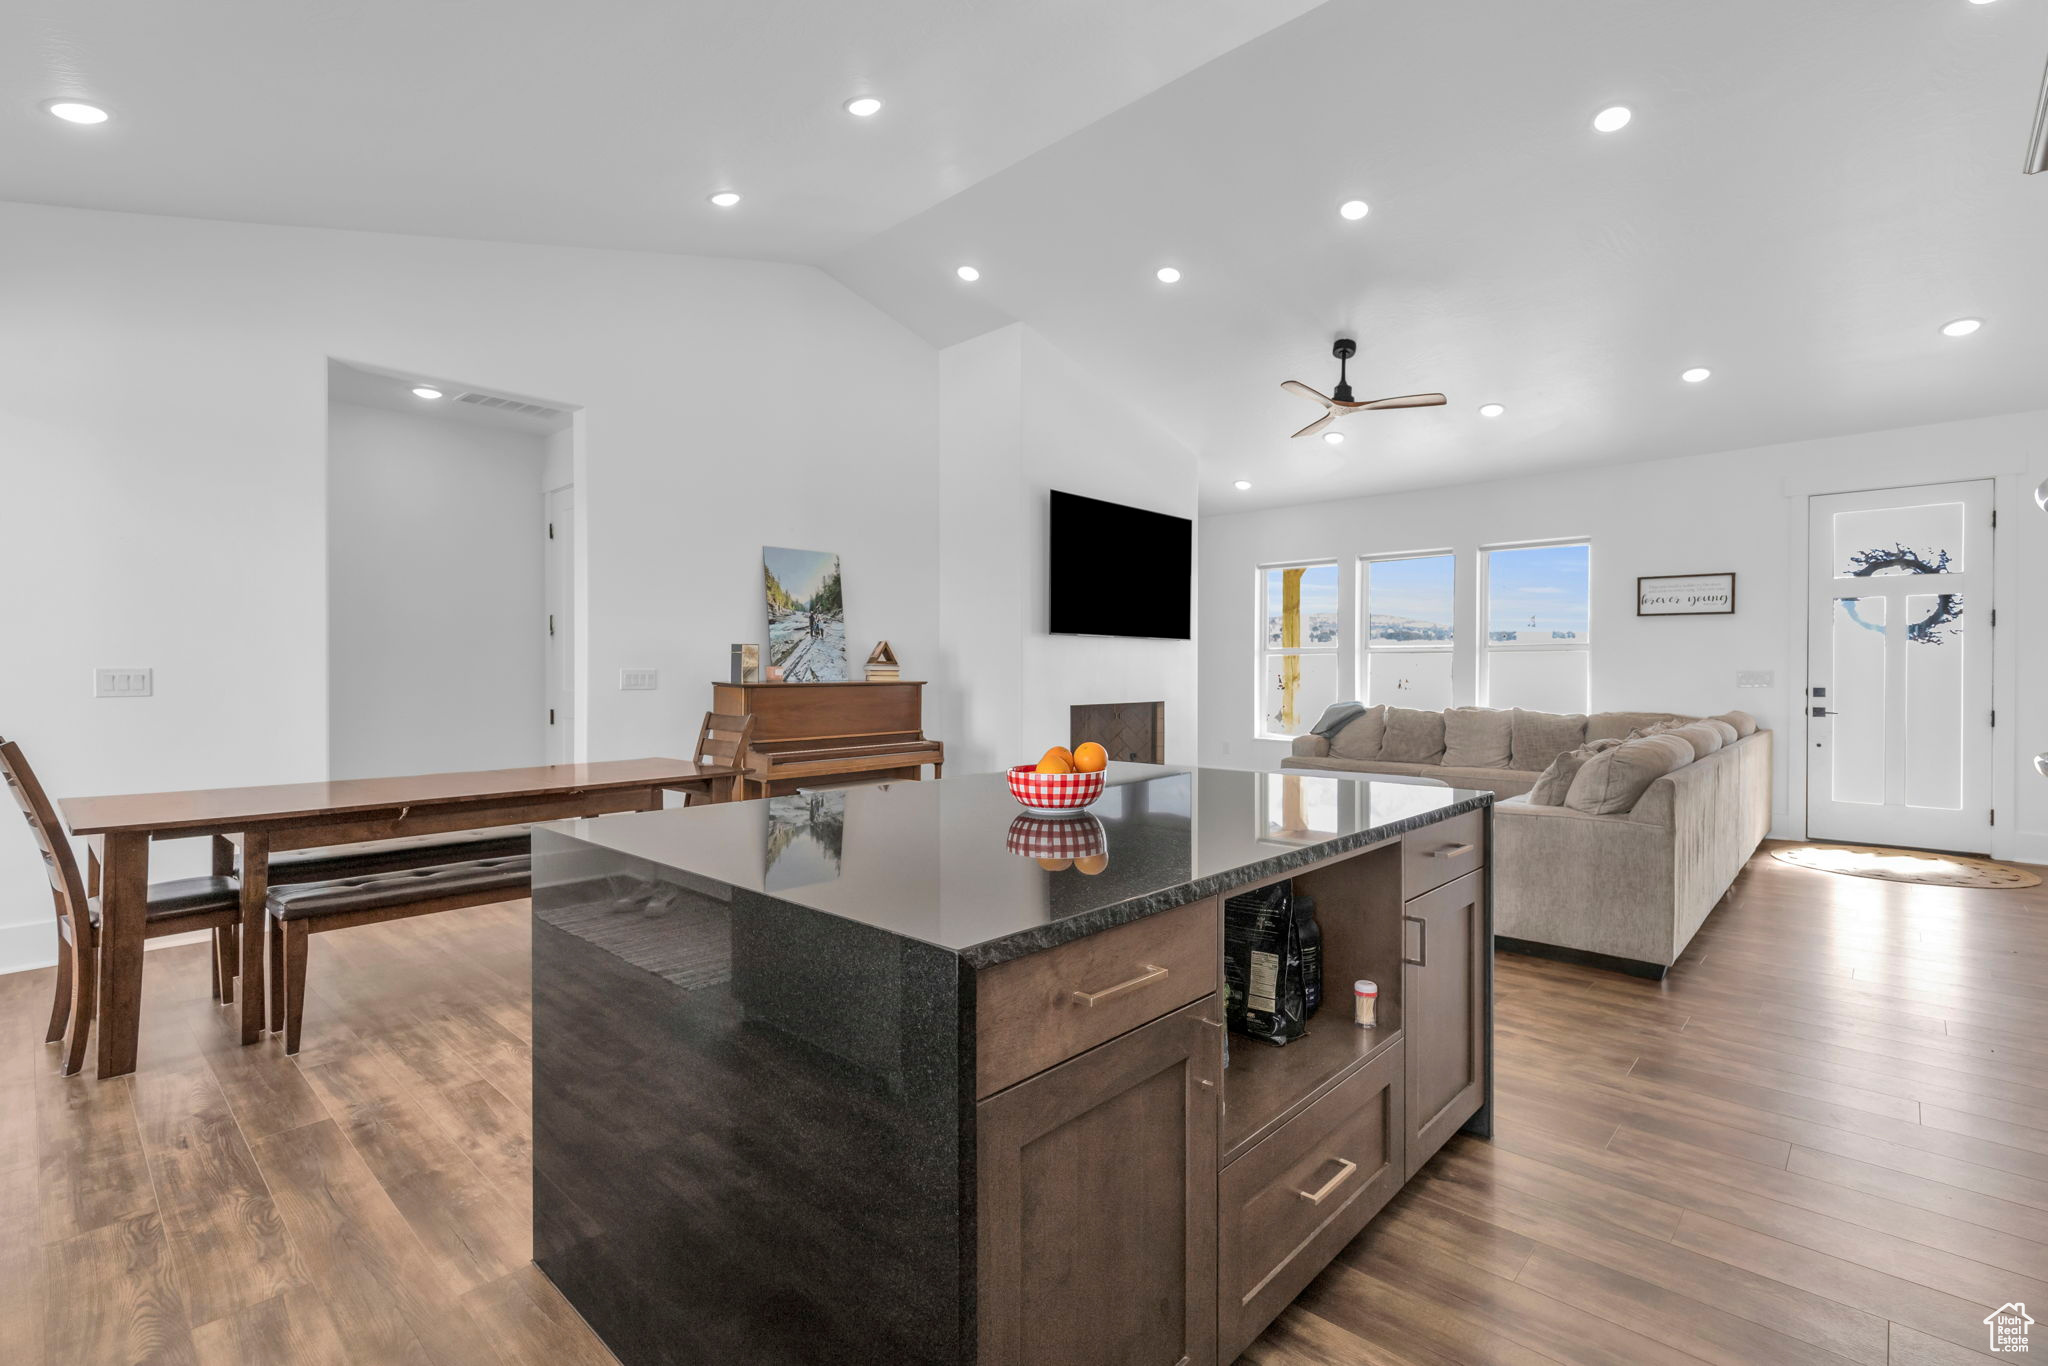 Kitchen featuring dark stone counters, a kitchen island, lofted ceiling, dark hardwood / wood-style floors, and ceiling fan